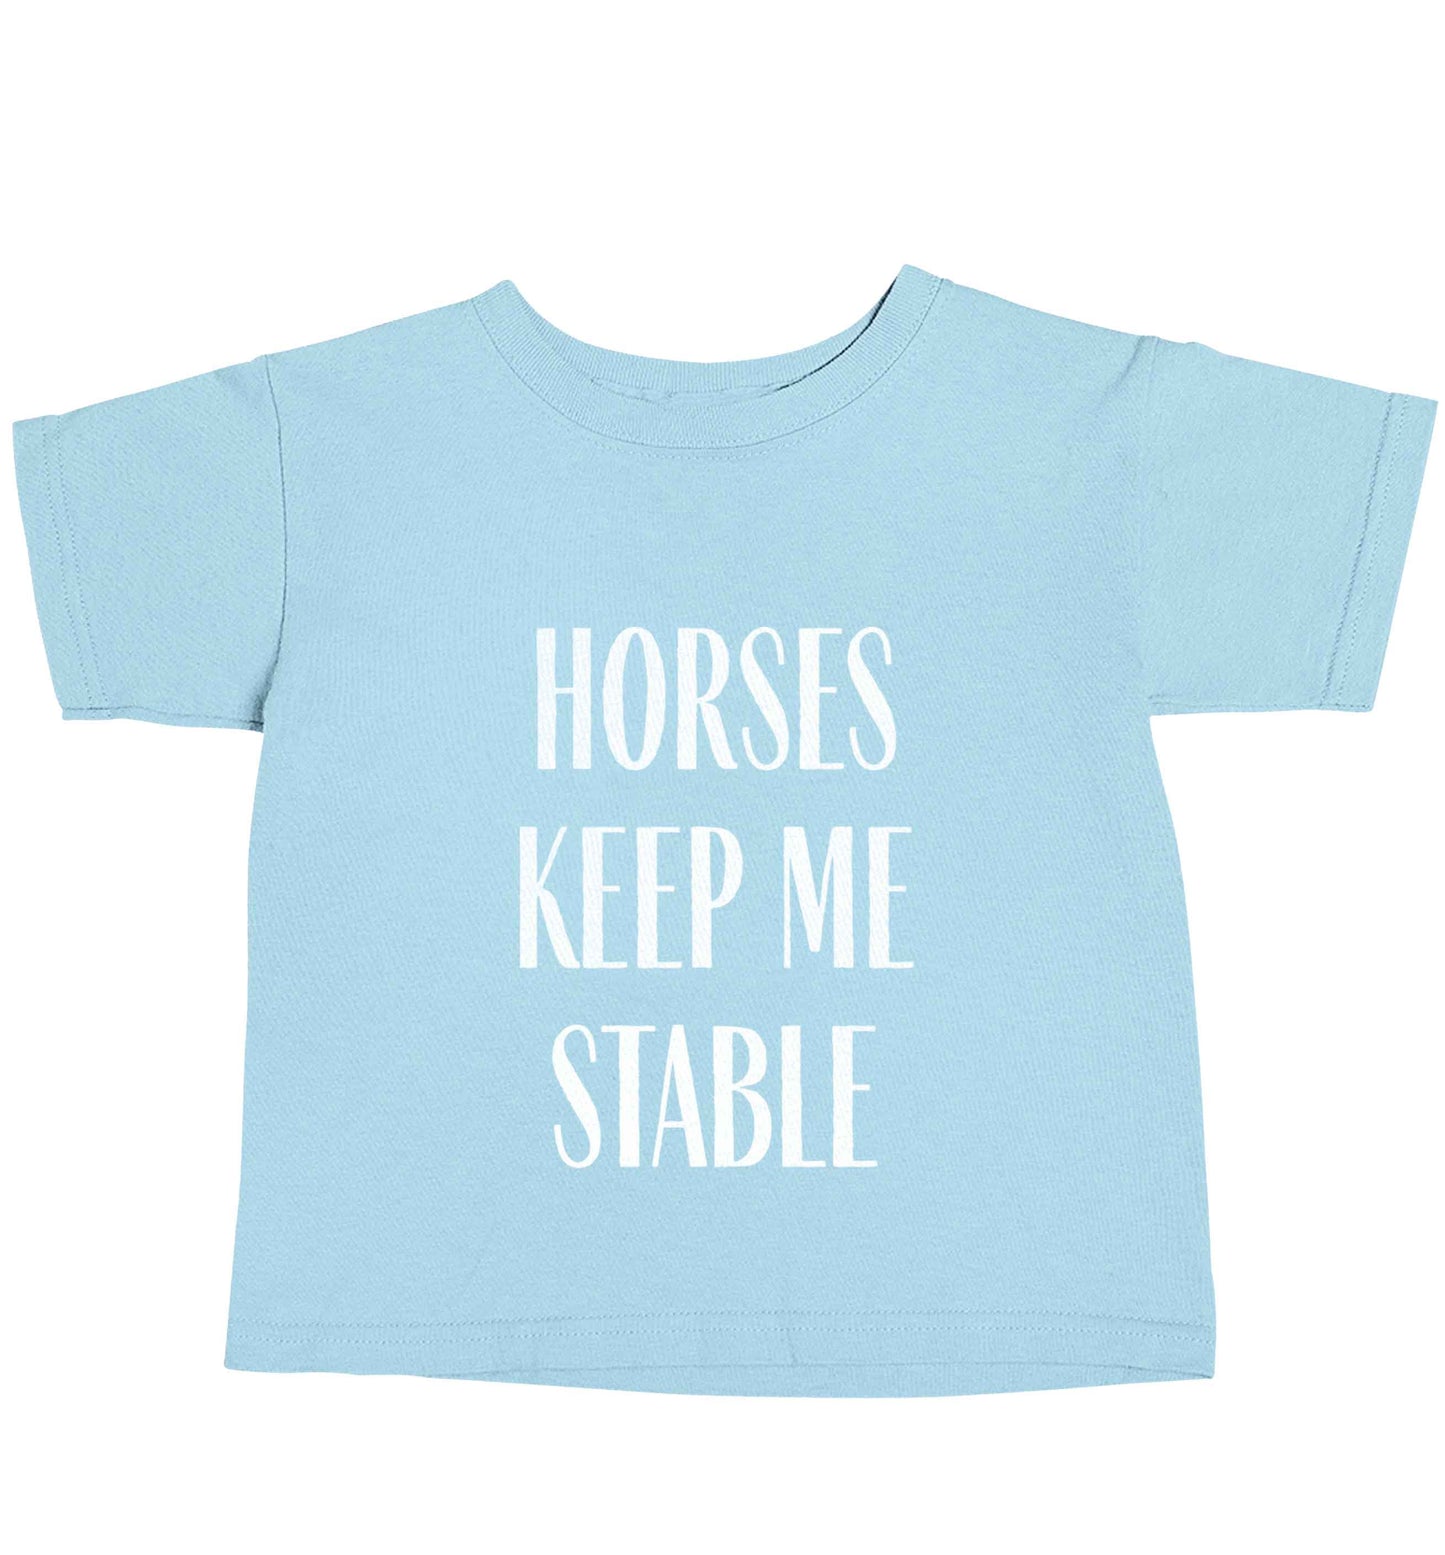 Horses keep me stable light blue baby toddler Tshirt 2 Years